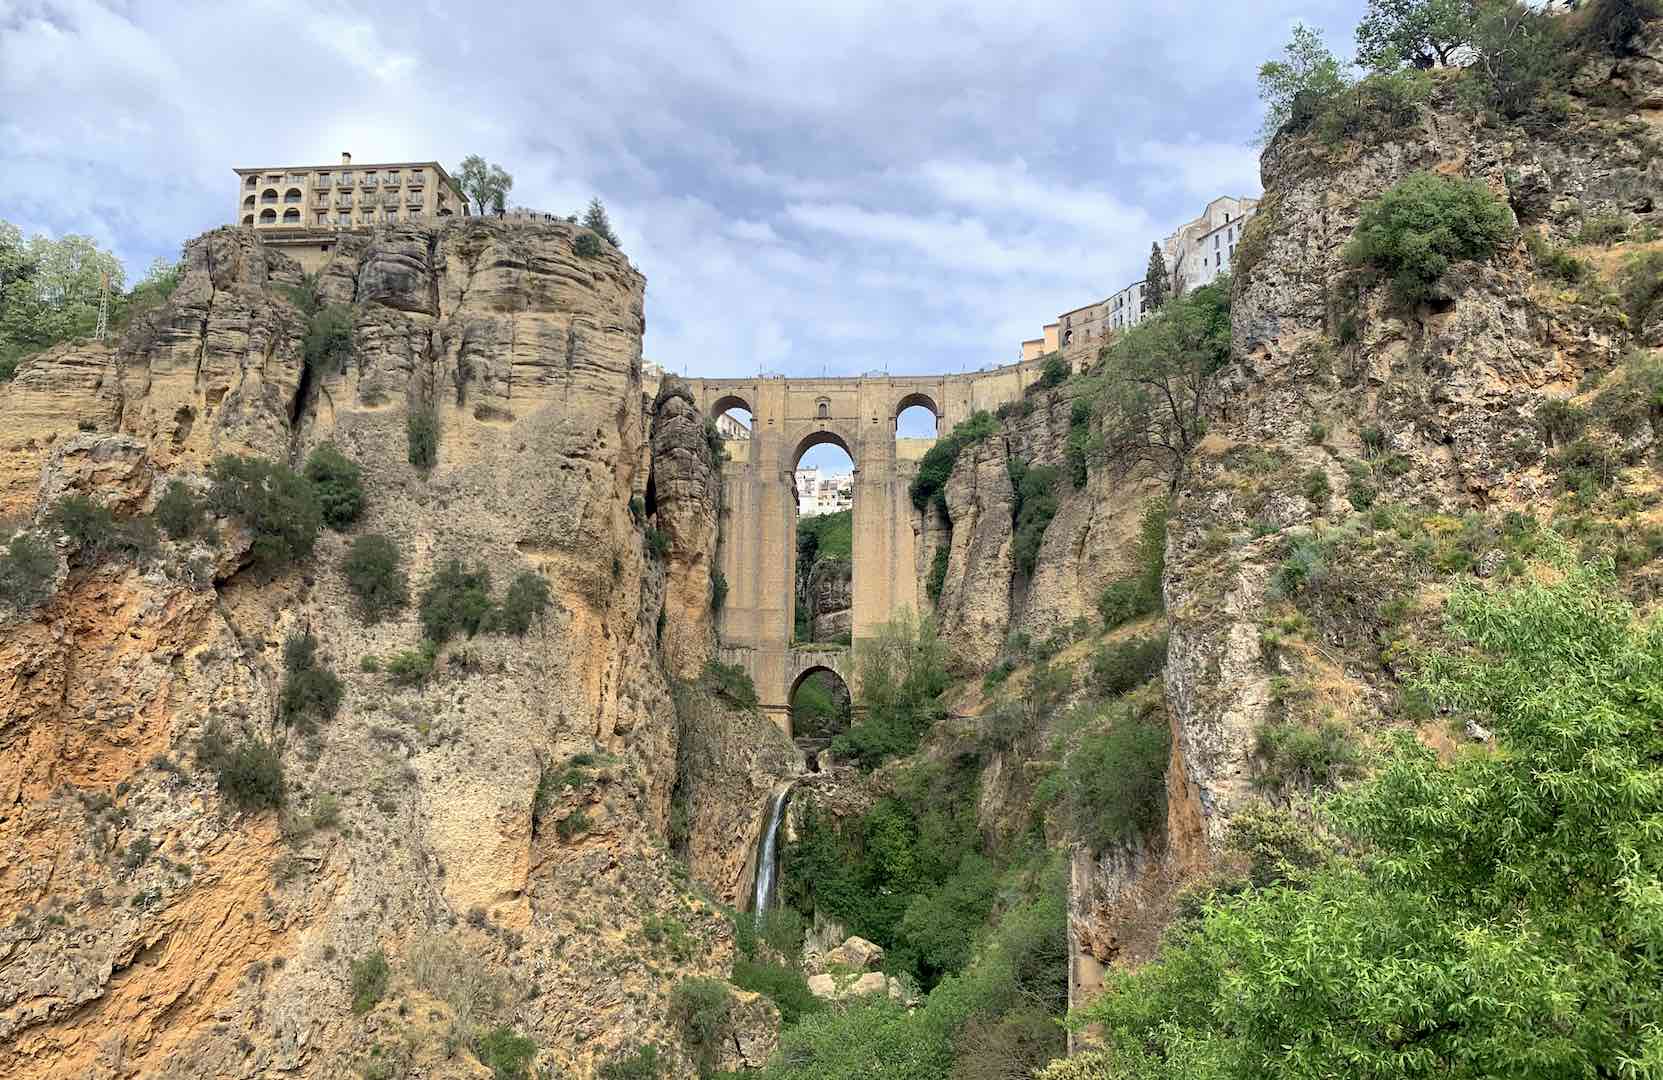 Ronda's iconic bridge connecting the new and old over a gorge.